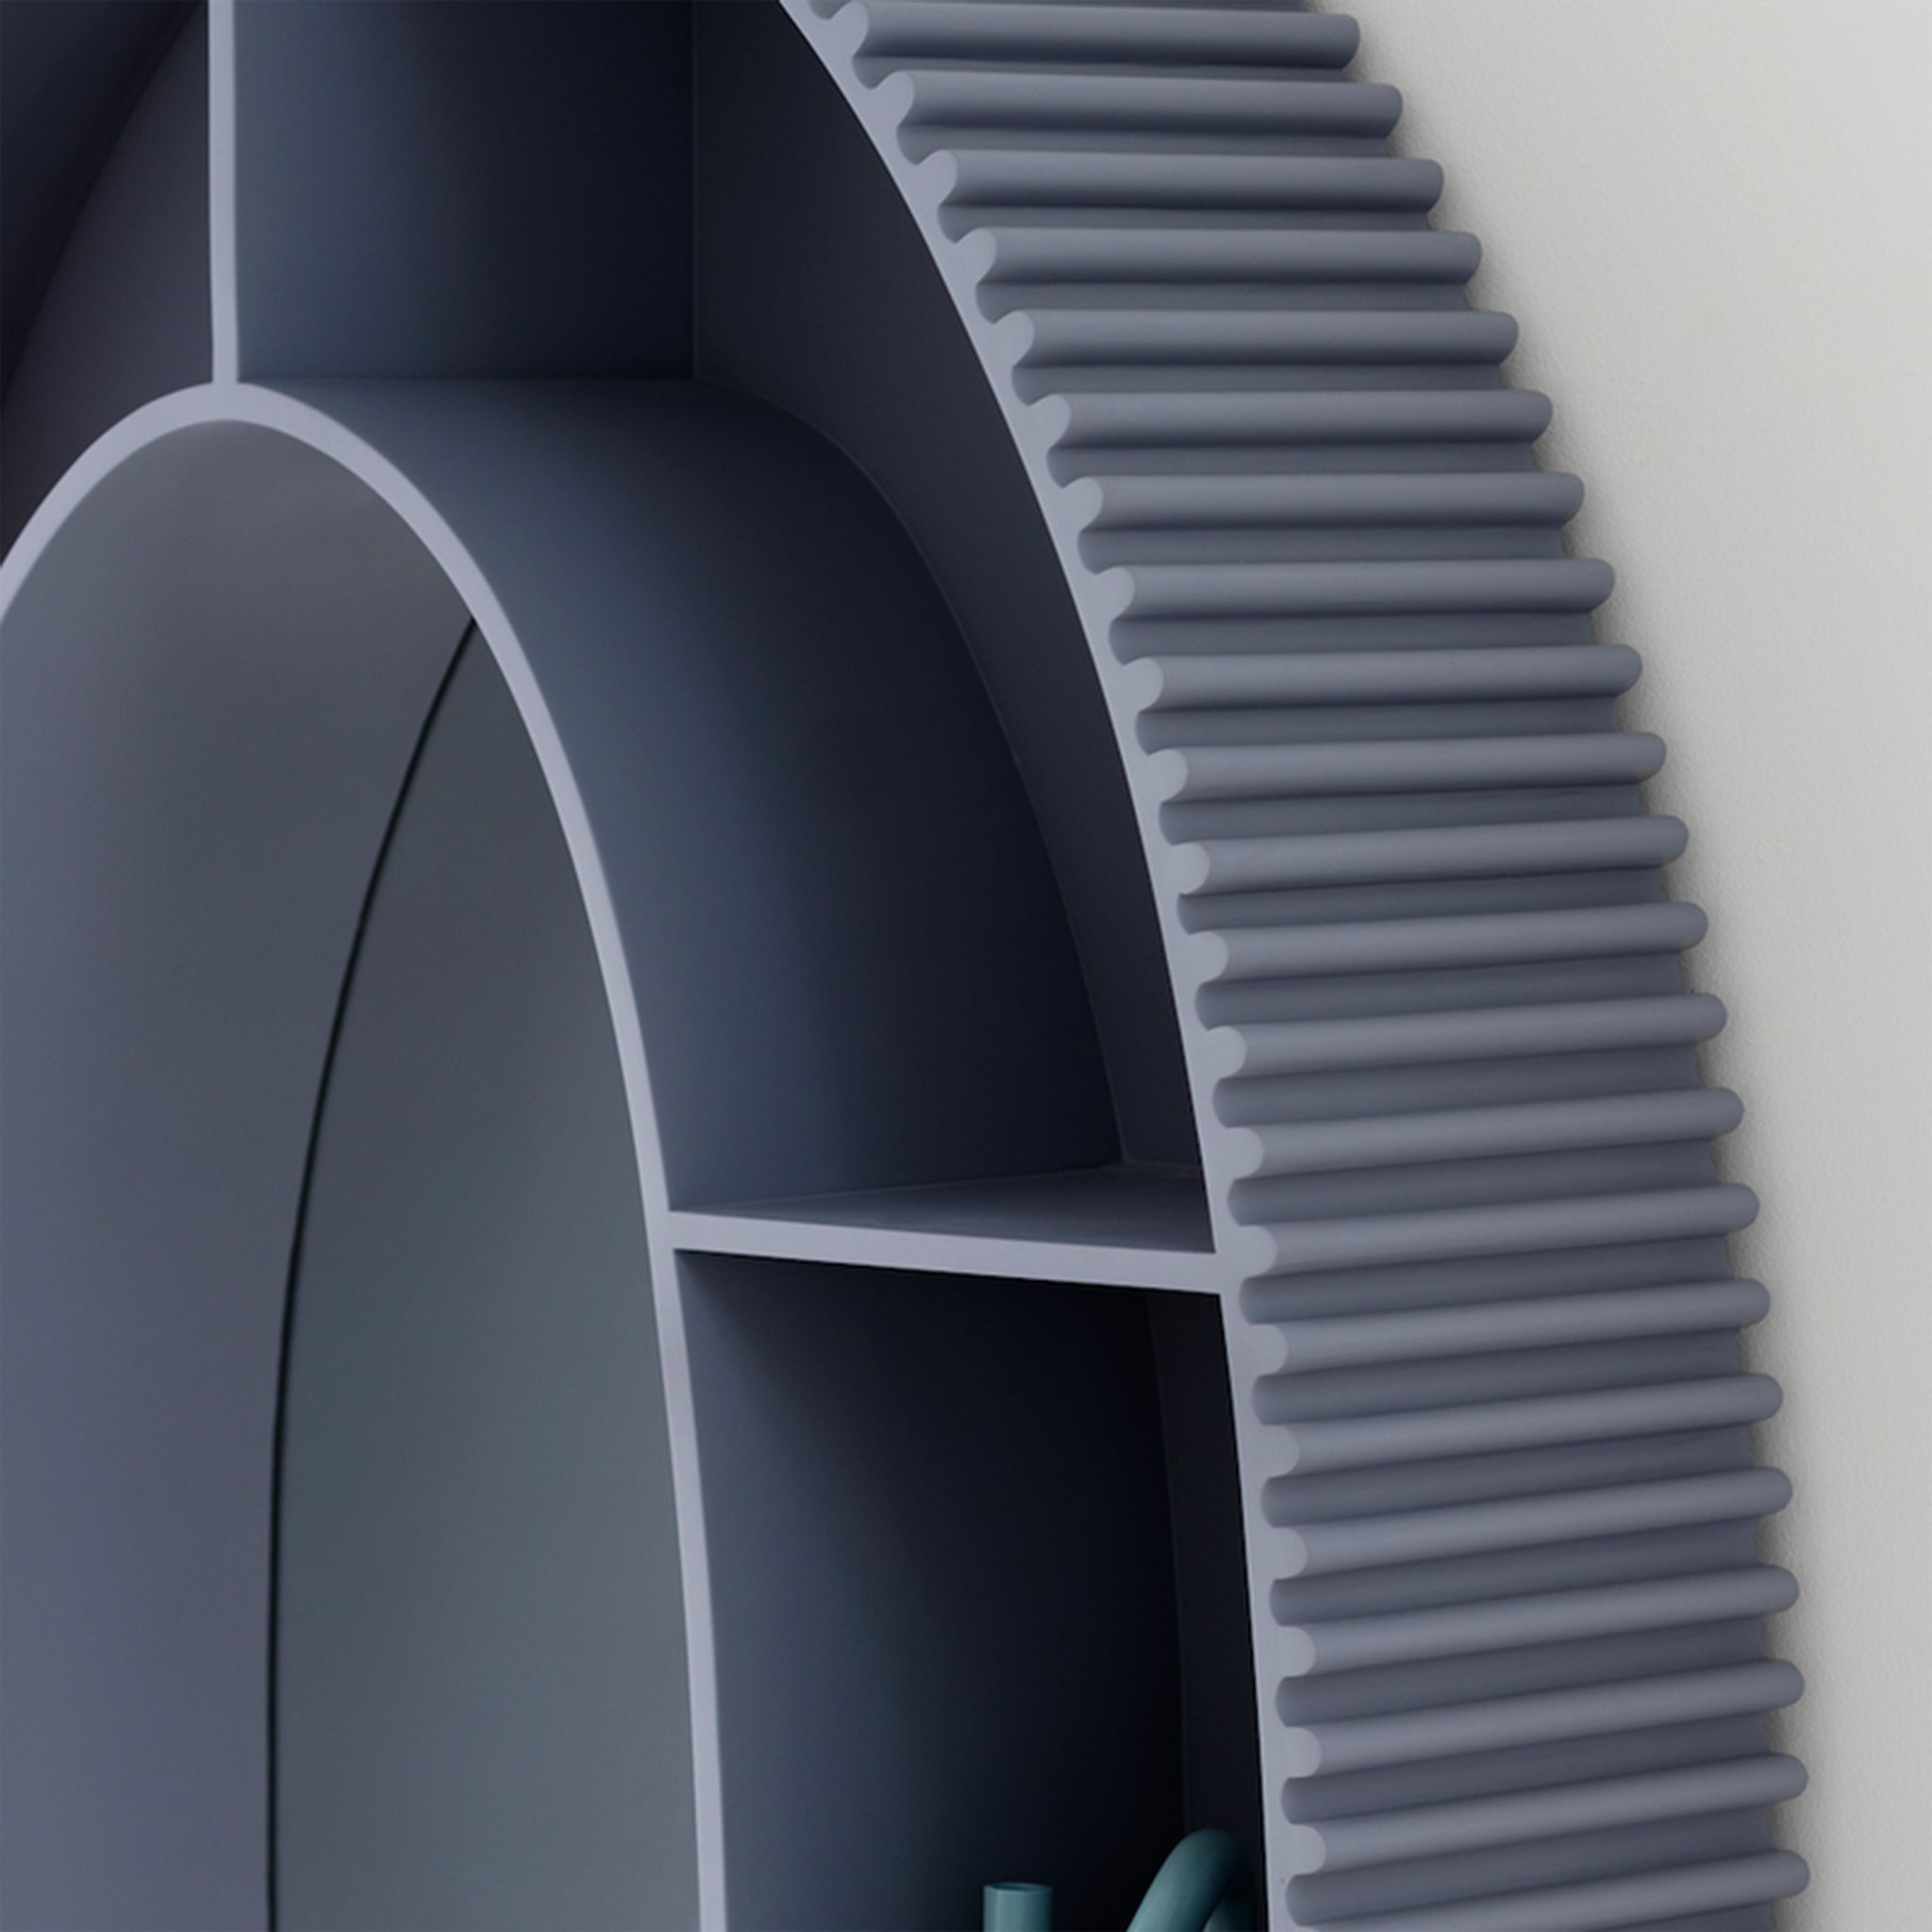 Close-up view of a modern, arch-shaped bookshelf in muted gray, highlighting the grooved edges and a single lit candle on one of the shelves. The bookshelf is positioned against a light gray wall, emphasizing its sleek and contemporary design.